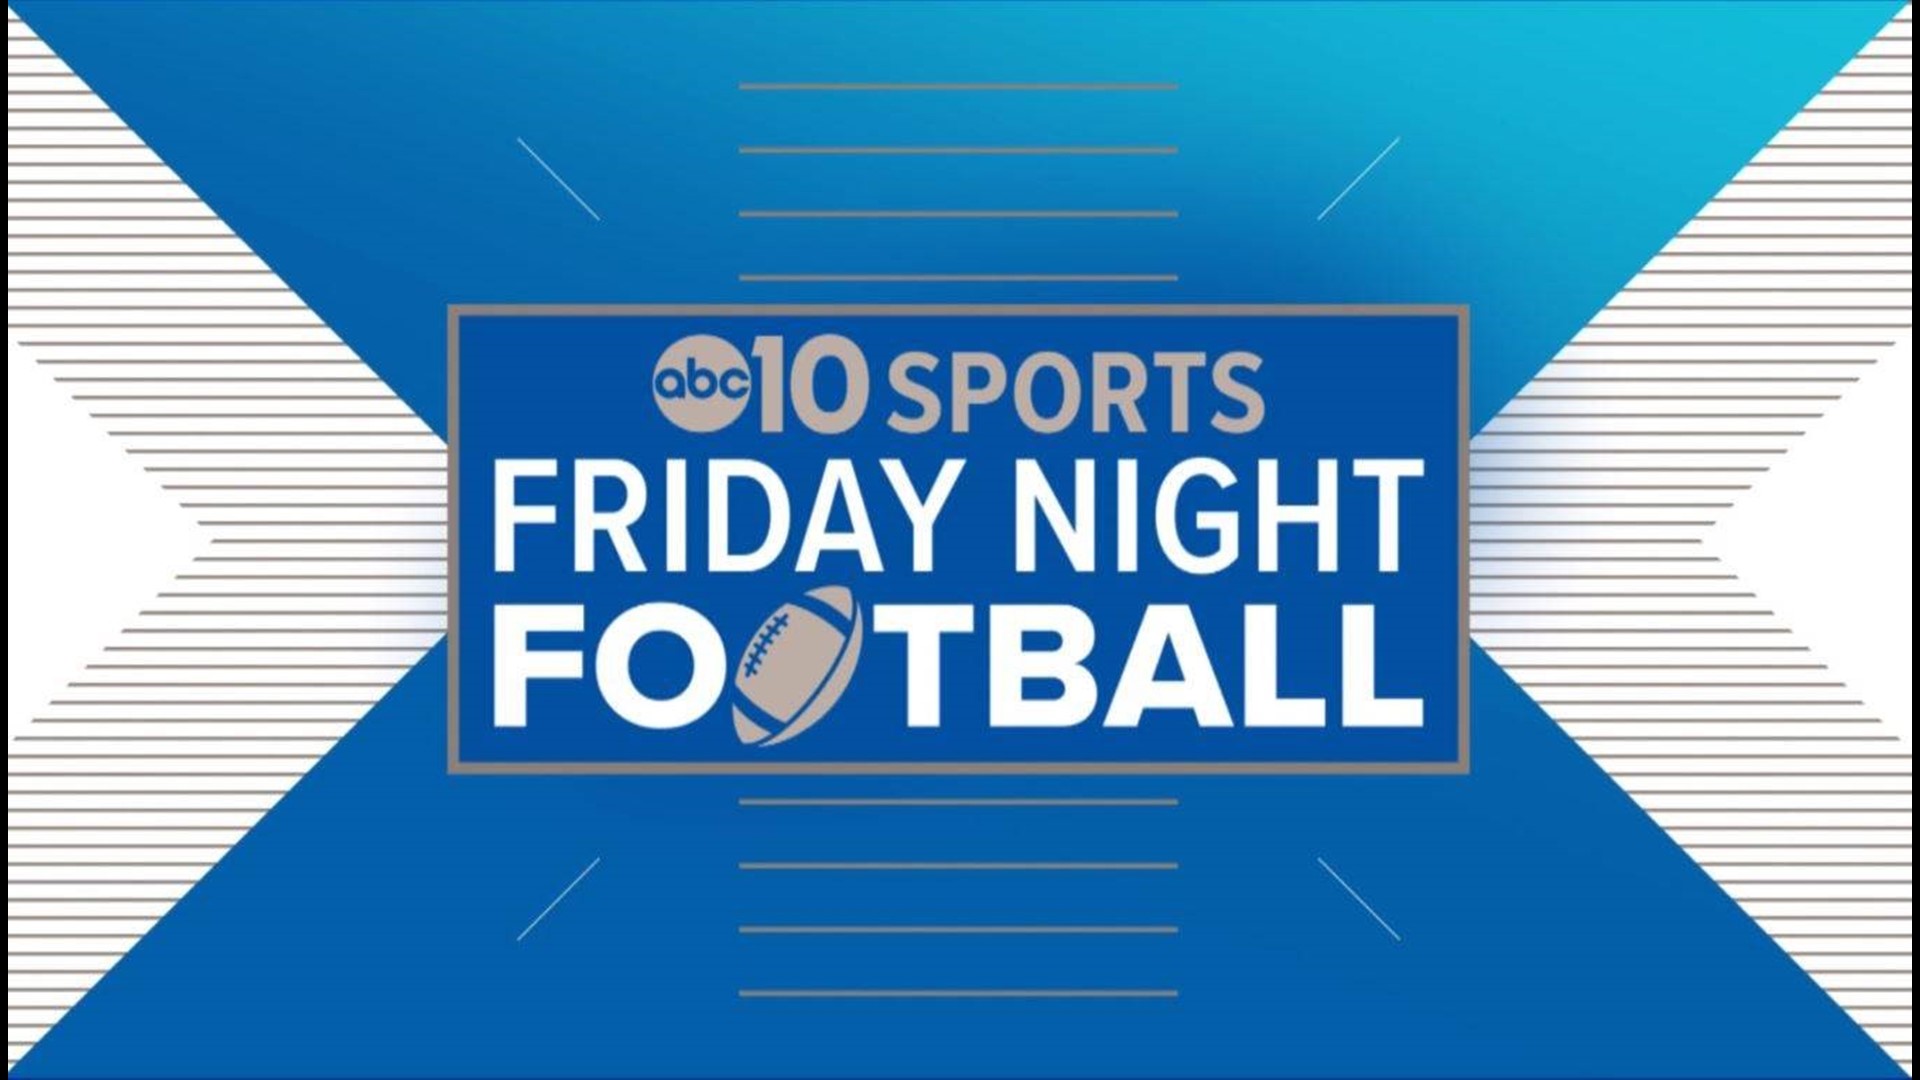 ABC10's Lina Washington and Kevin John bring you the highlights from some of the biggest matchups in Week 9 of the high school football season.